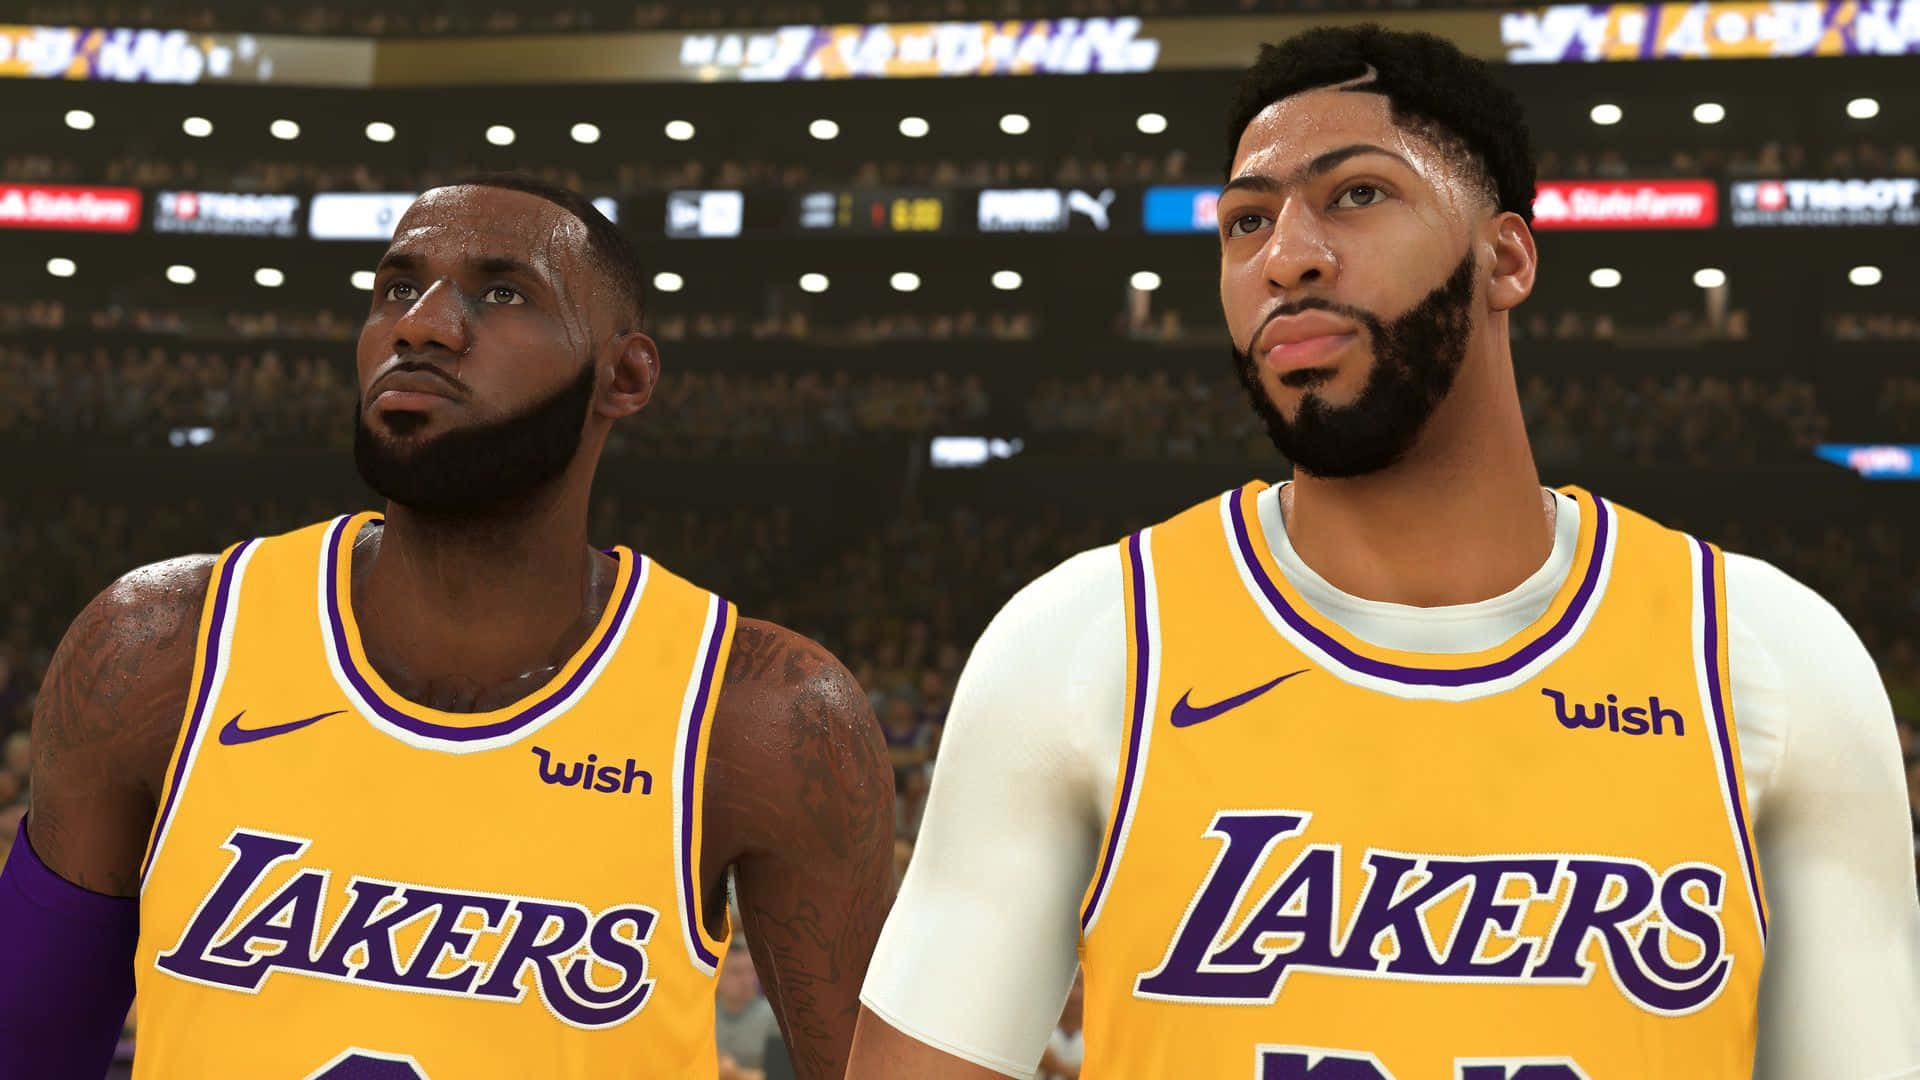 Intense NBA 2K20 gameplay featuring LeBron James and the Lakers Wallpaper